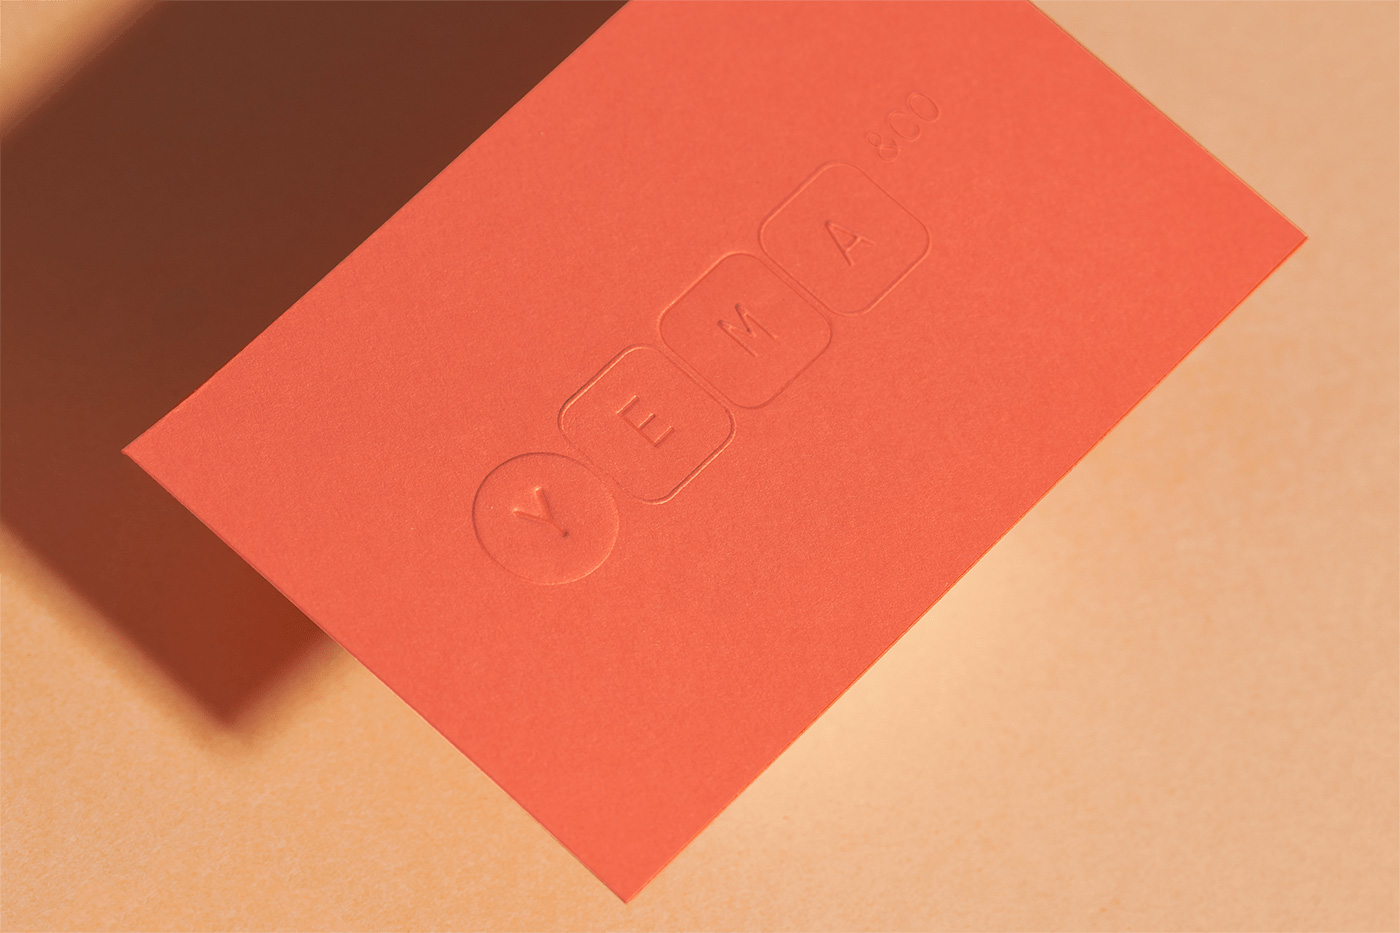 New Logo and Packaging for YEMA by Anagrama